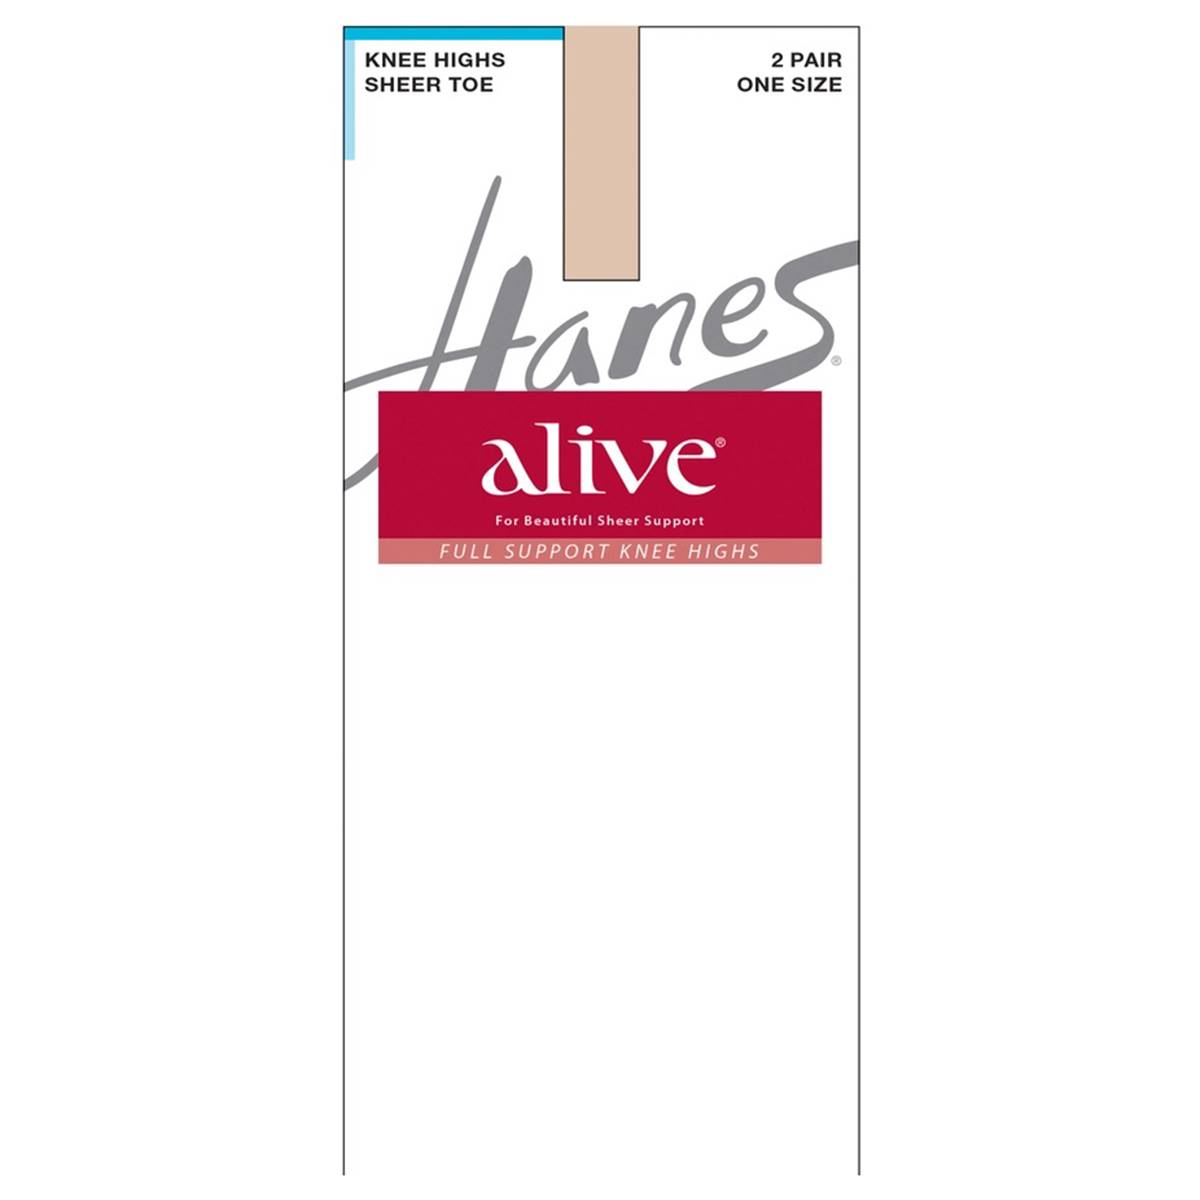 Womens Hanes(R) Alive Full Support Knee High Hosiery